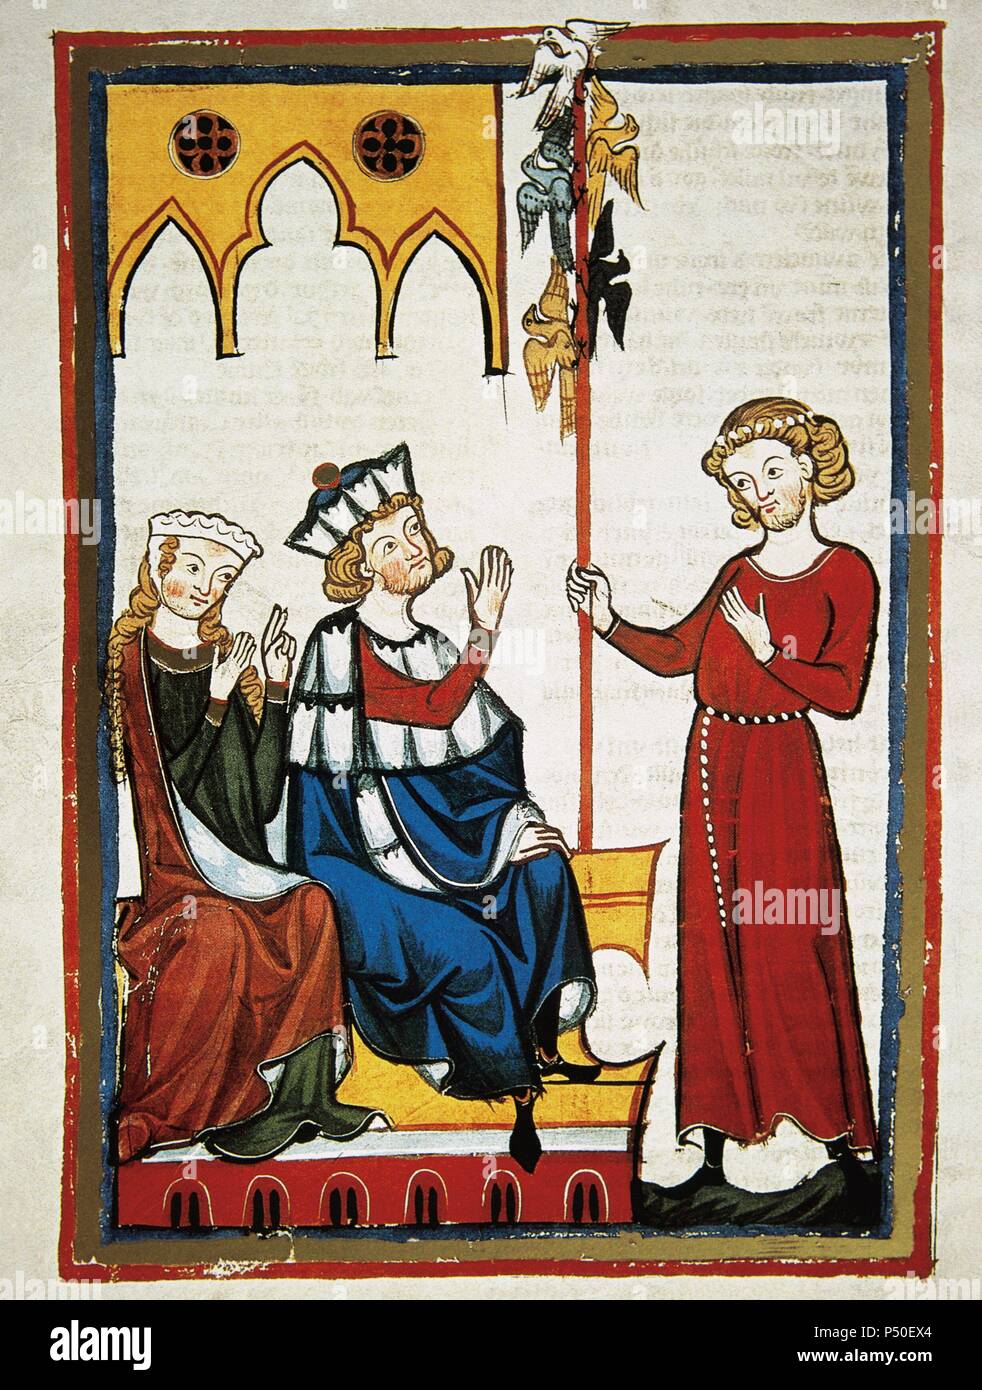 Spervogel, poet of the 12th century, offers his lyrics to the Court. Codex Manesse (ca.1300) by Rudiger Manesse and his son Johannes. University of  Heidelberg. Library. Germany. Stock Photo